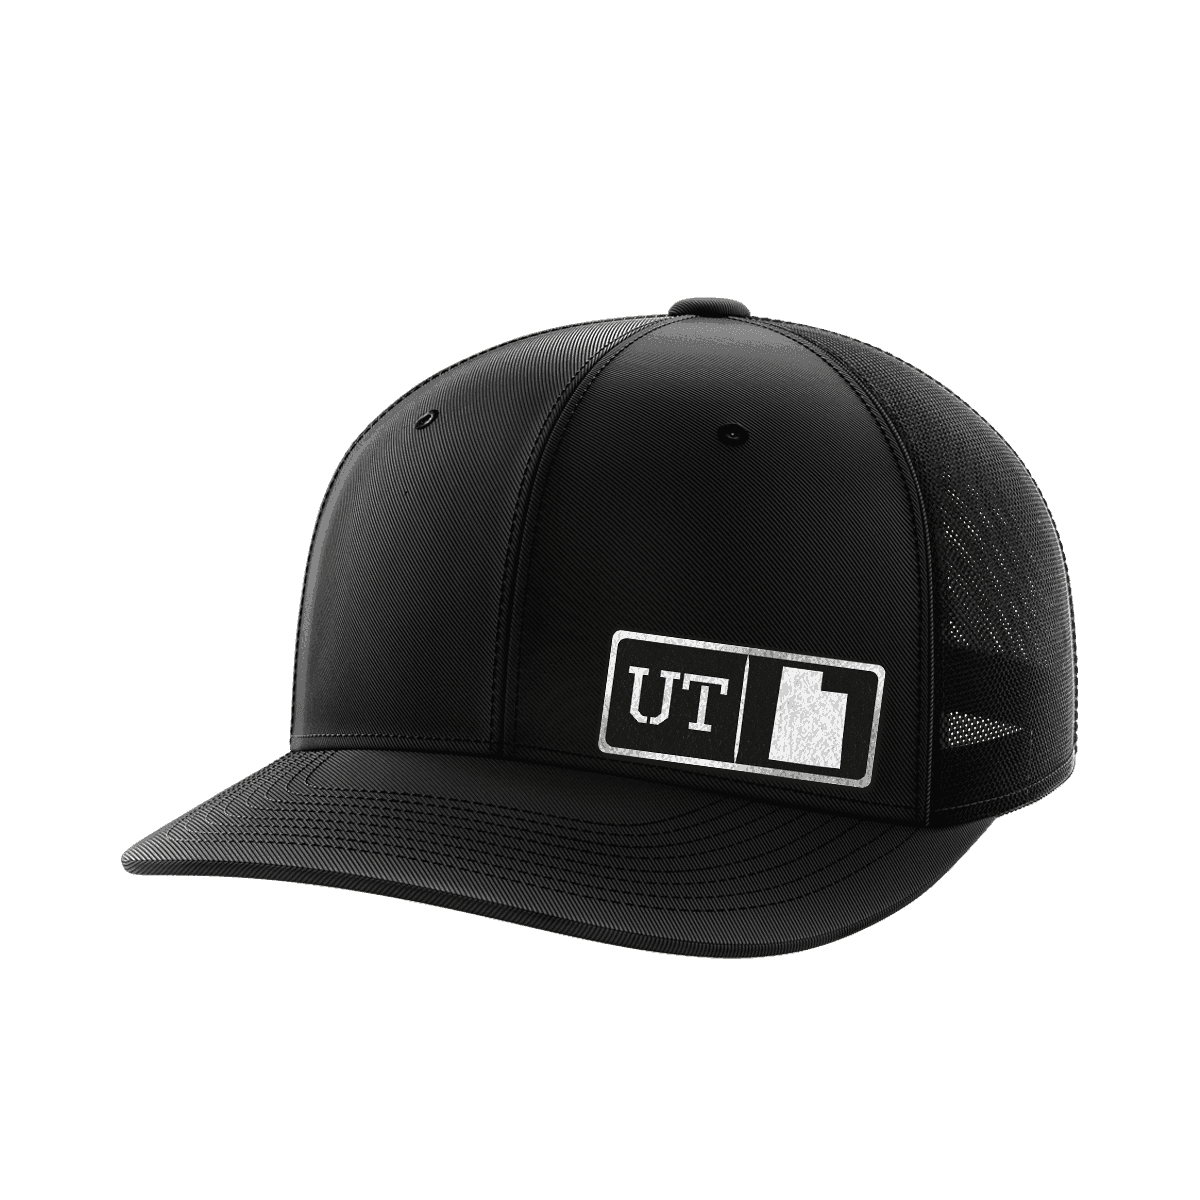 Utah Homegrown Collection (black leather)